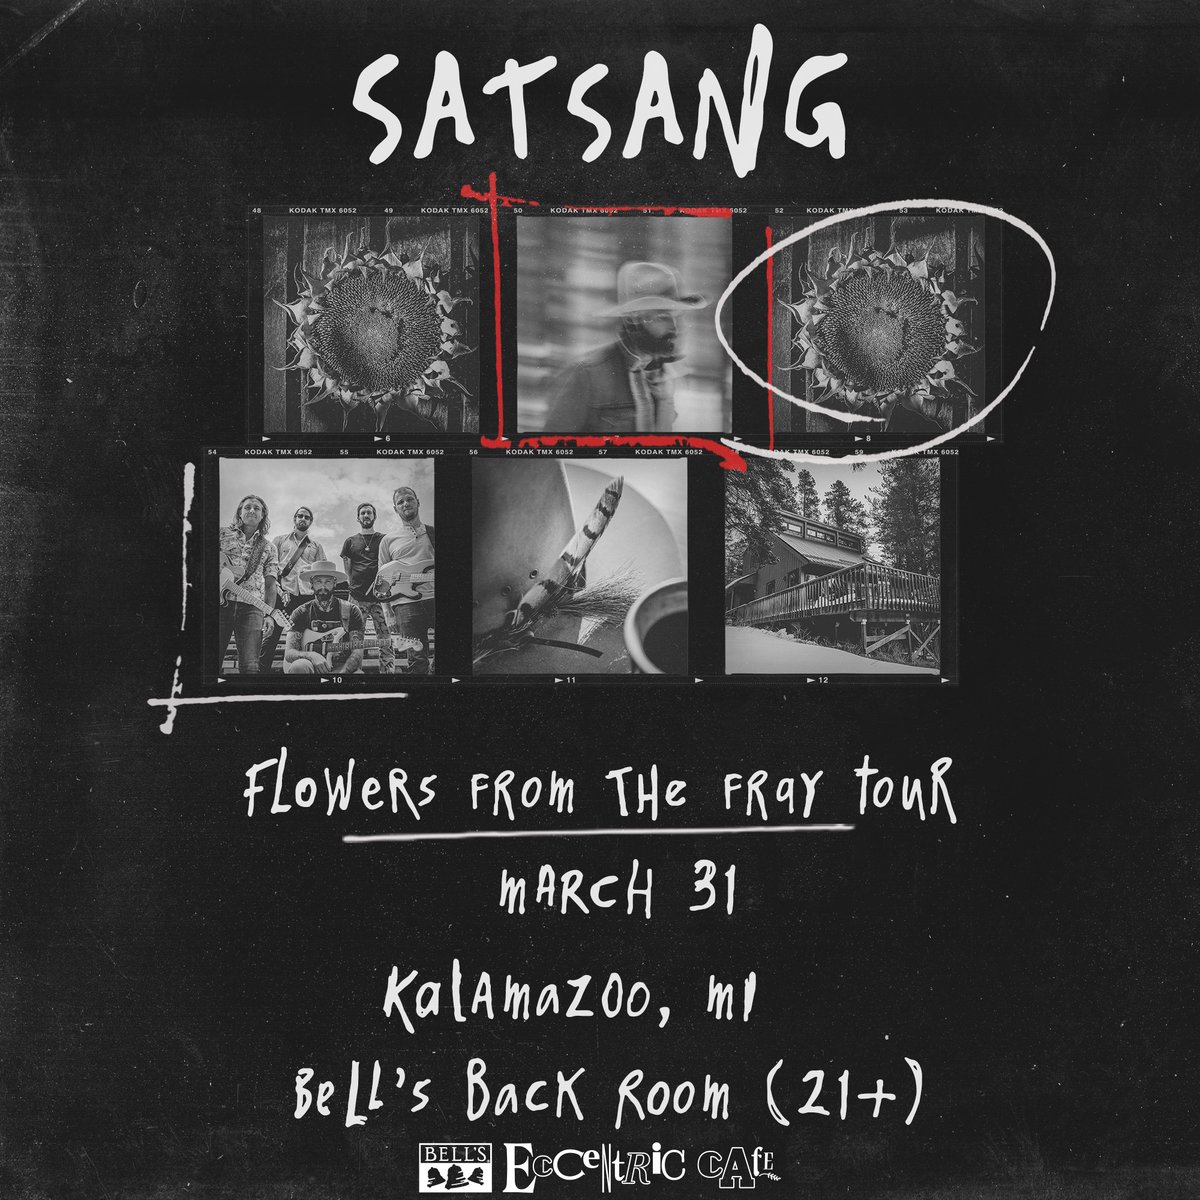 Don't miss @satsang in the Back Room this Friday! Tickets at bit.ly/3LjMKEz.